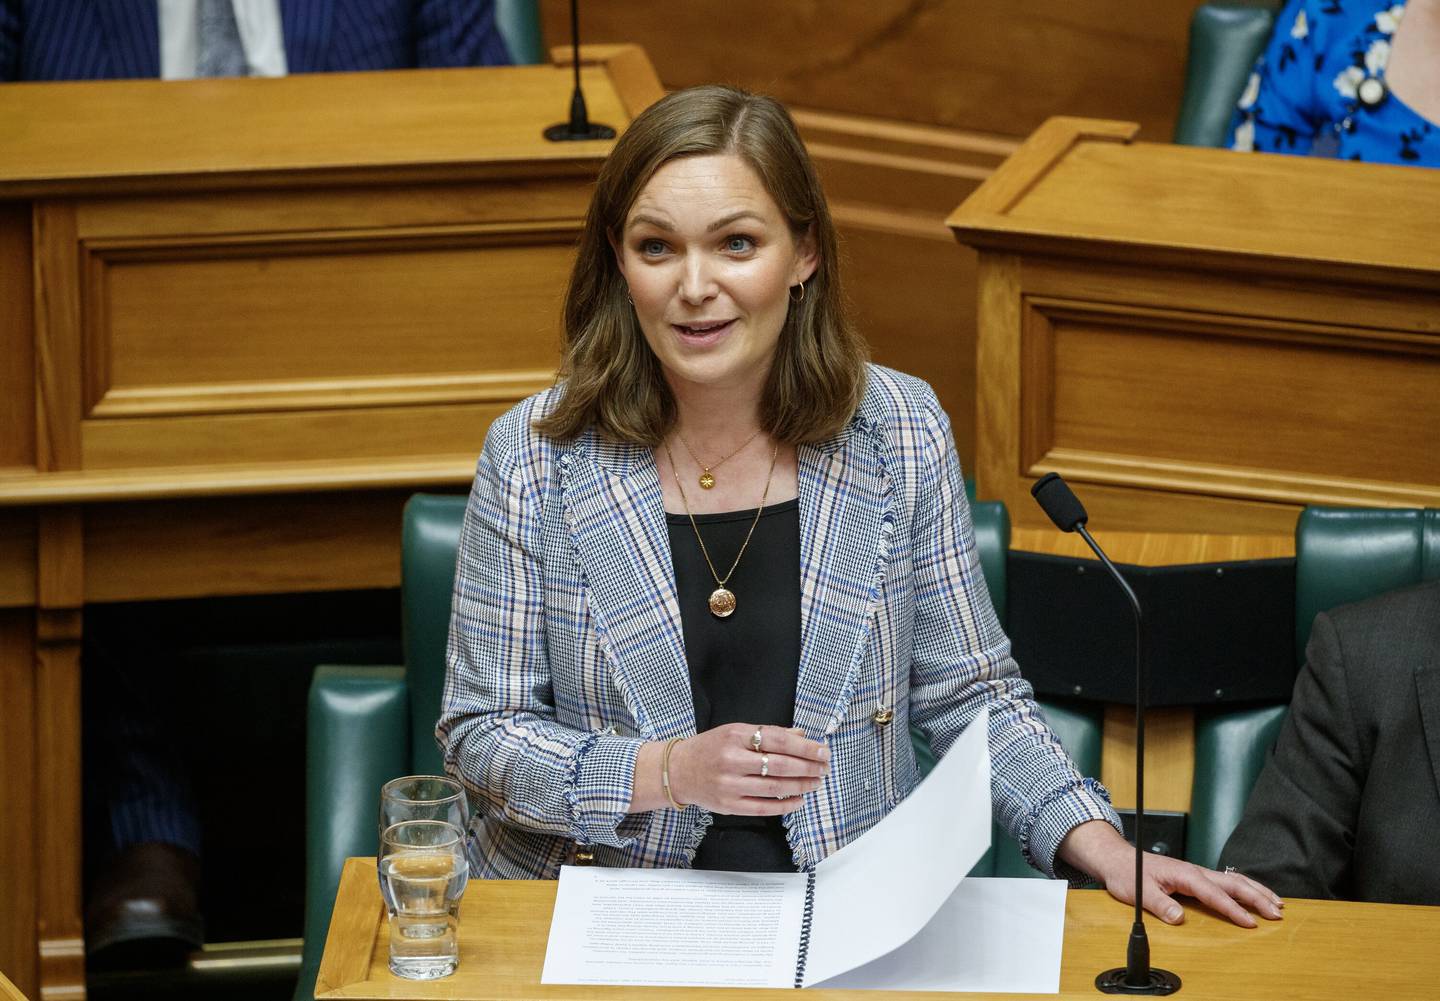 Napier MP Katie Nimon spoke about her family's history in her maiden speech. Photo / Mark Mitchell